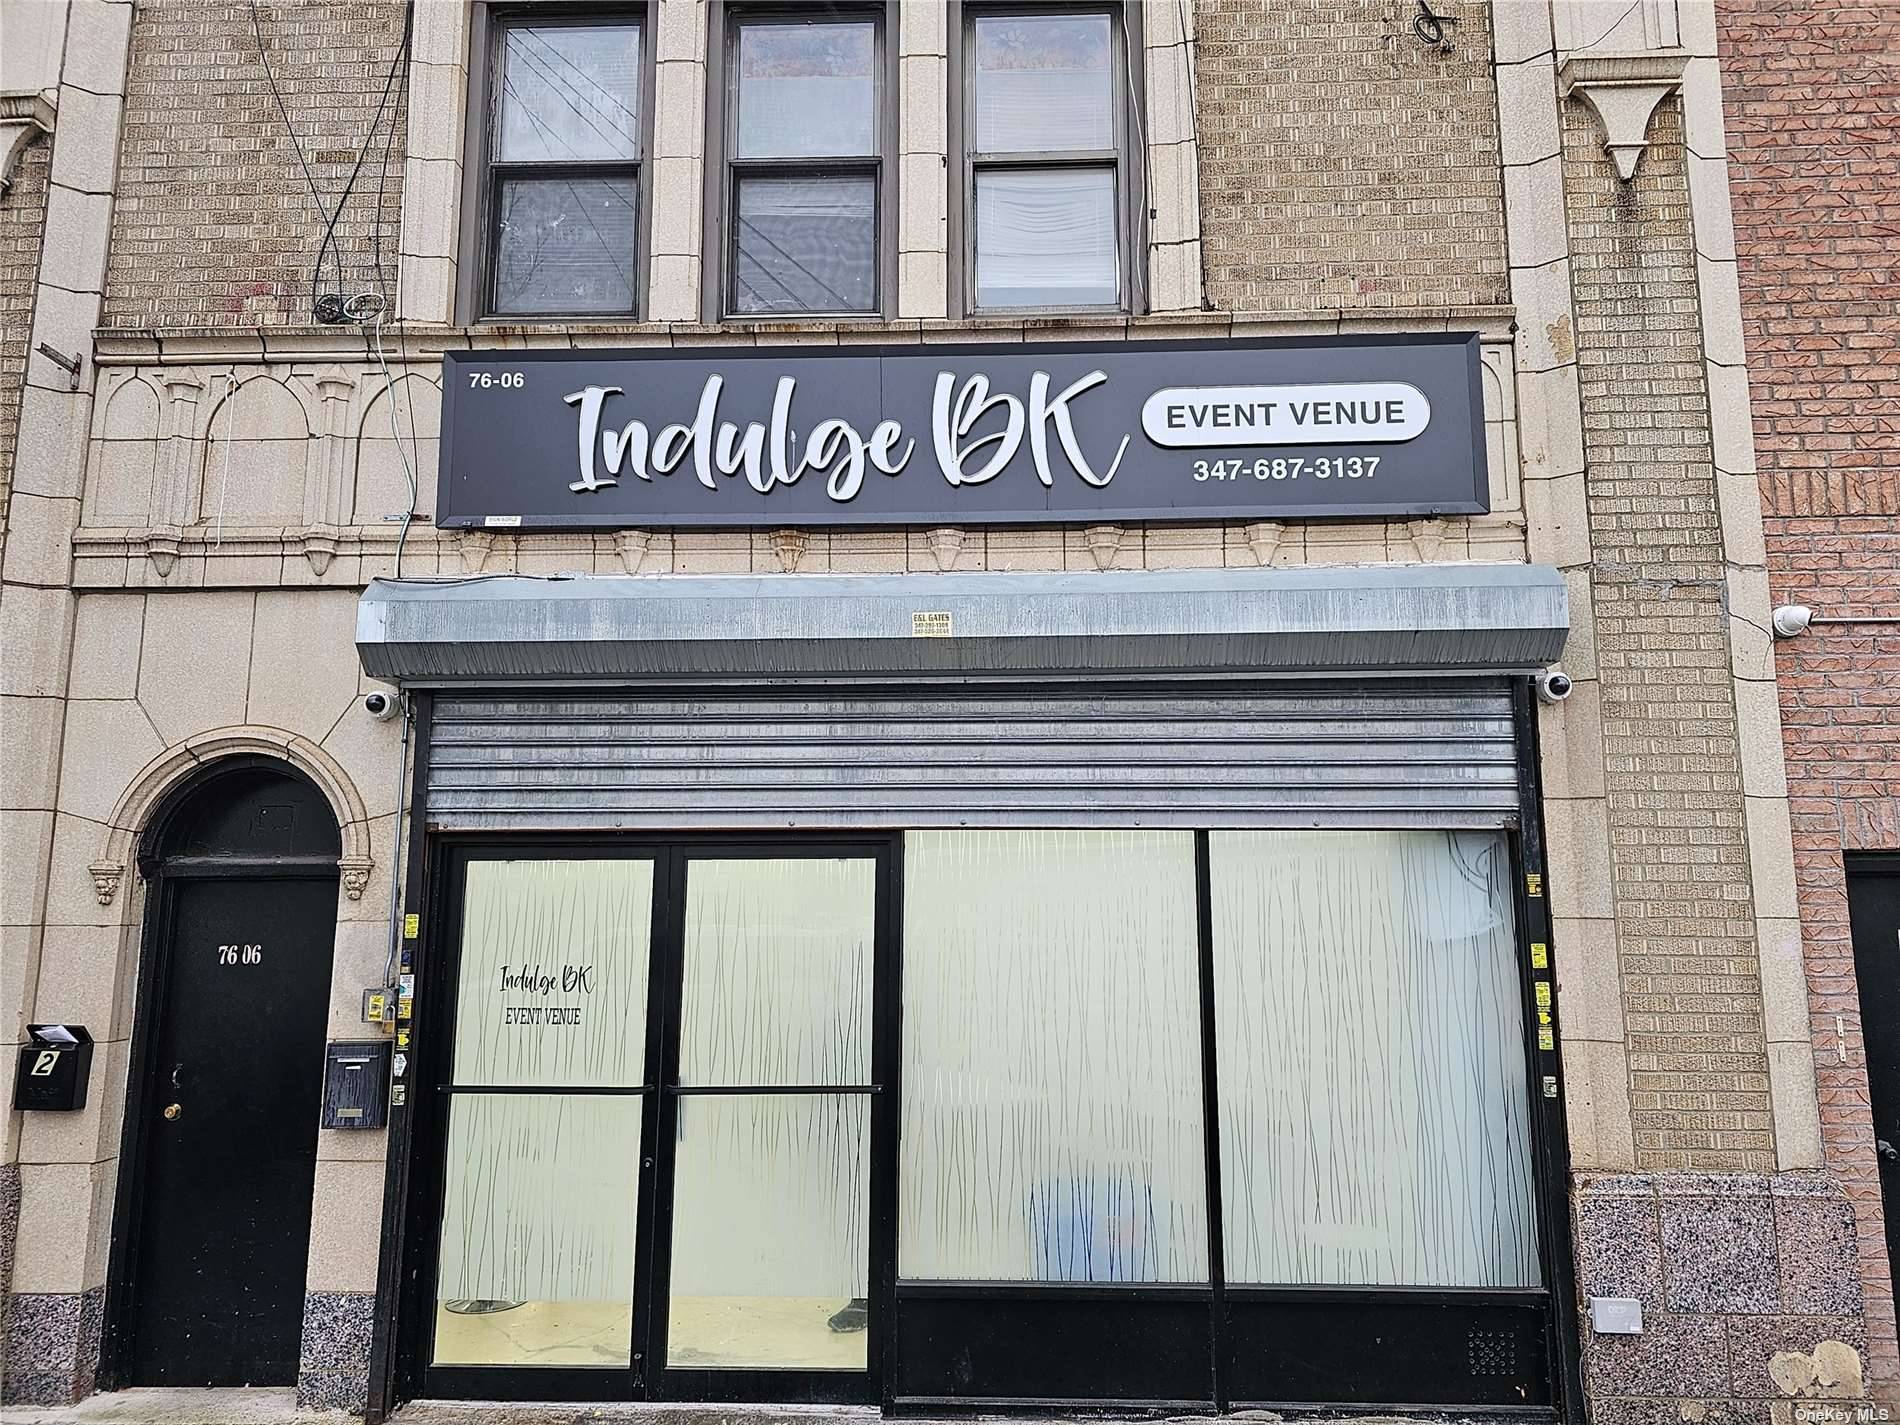 Introducing a prime real estate opportunity on the bustling Rockaway Blvd a mixed use gem that combines commercial success with residential comfort.